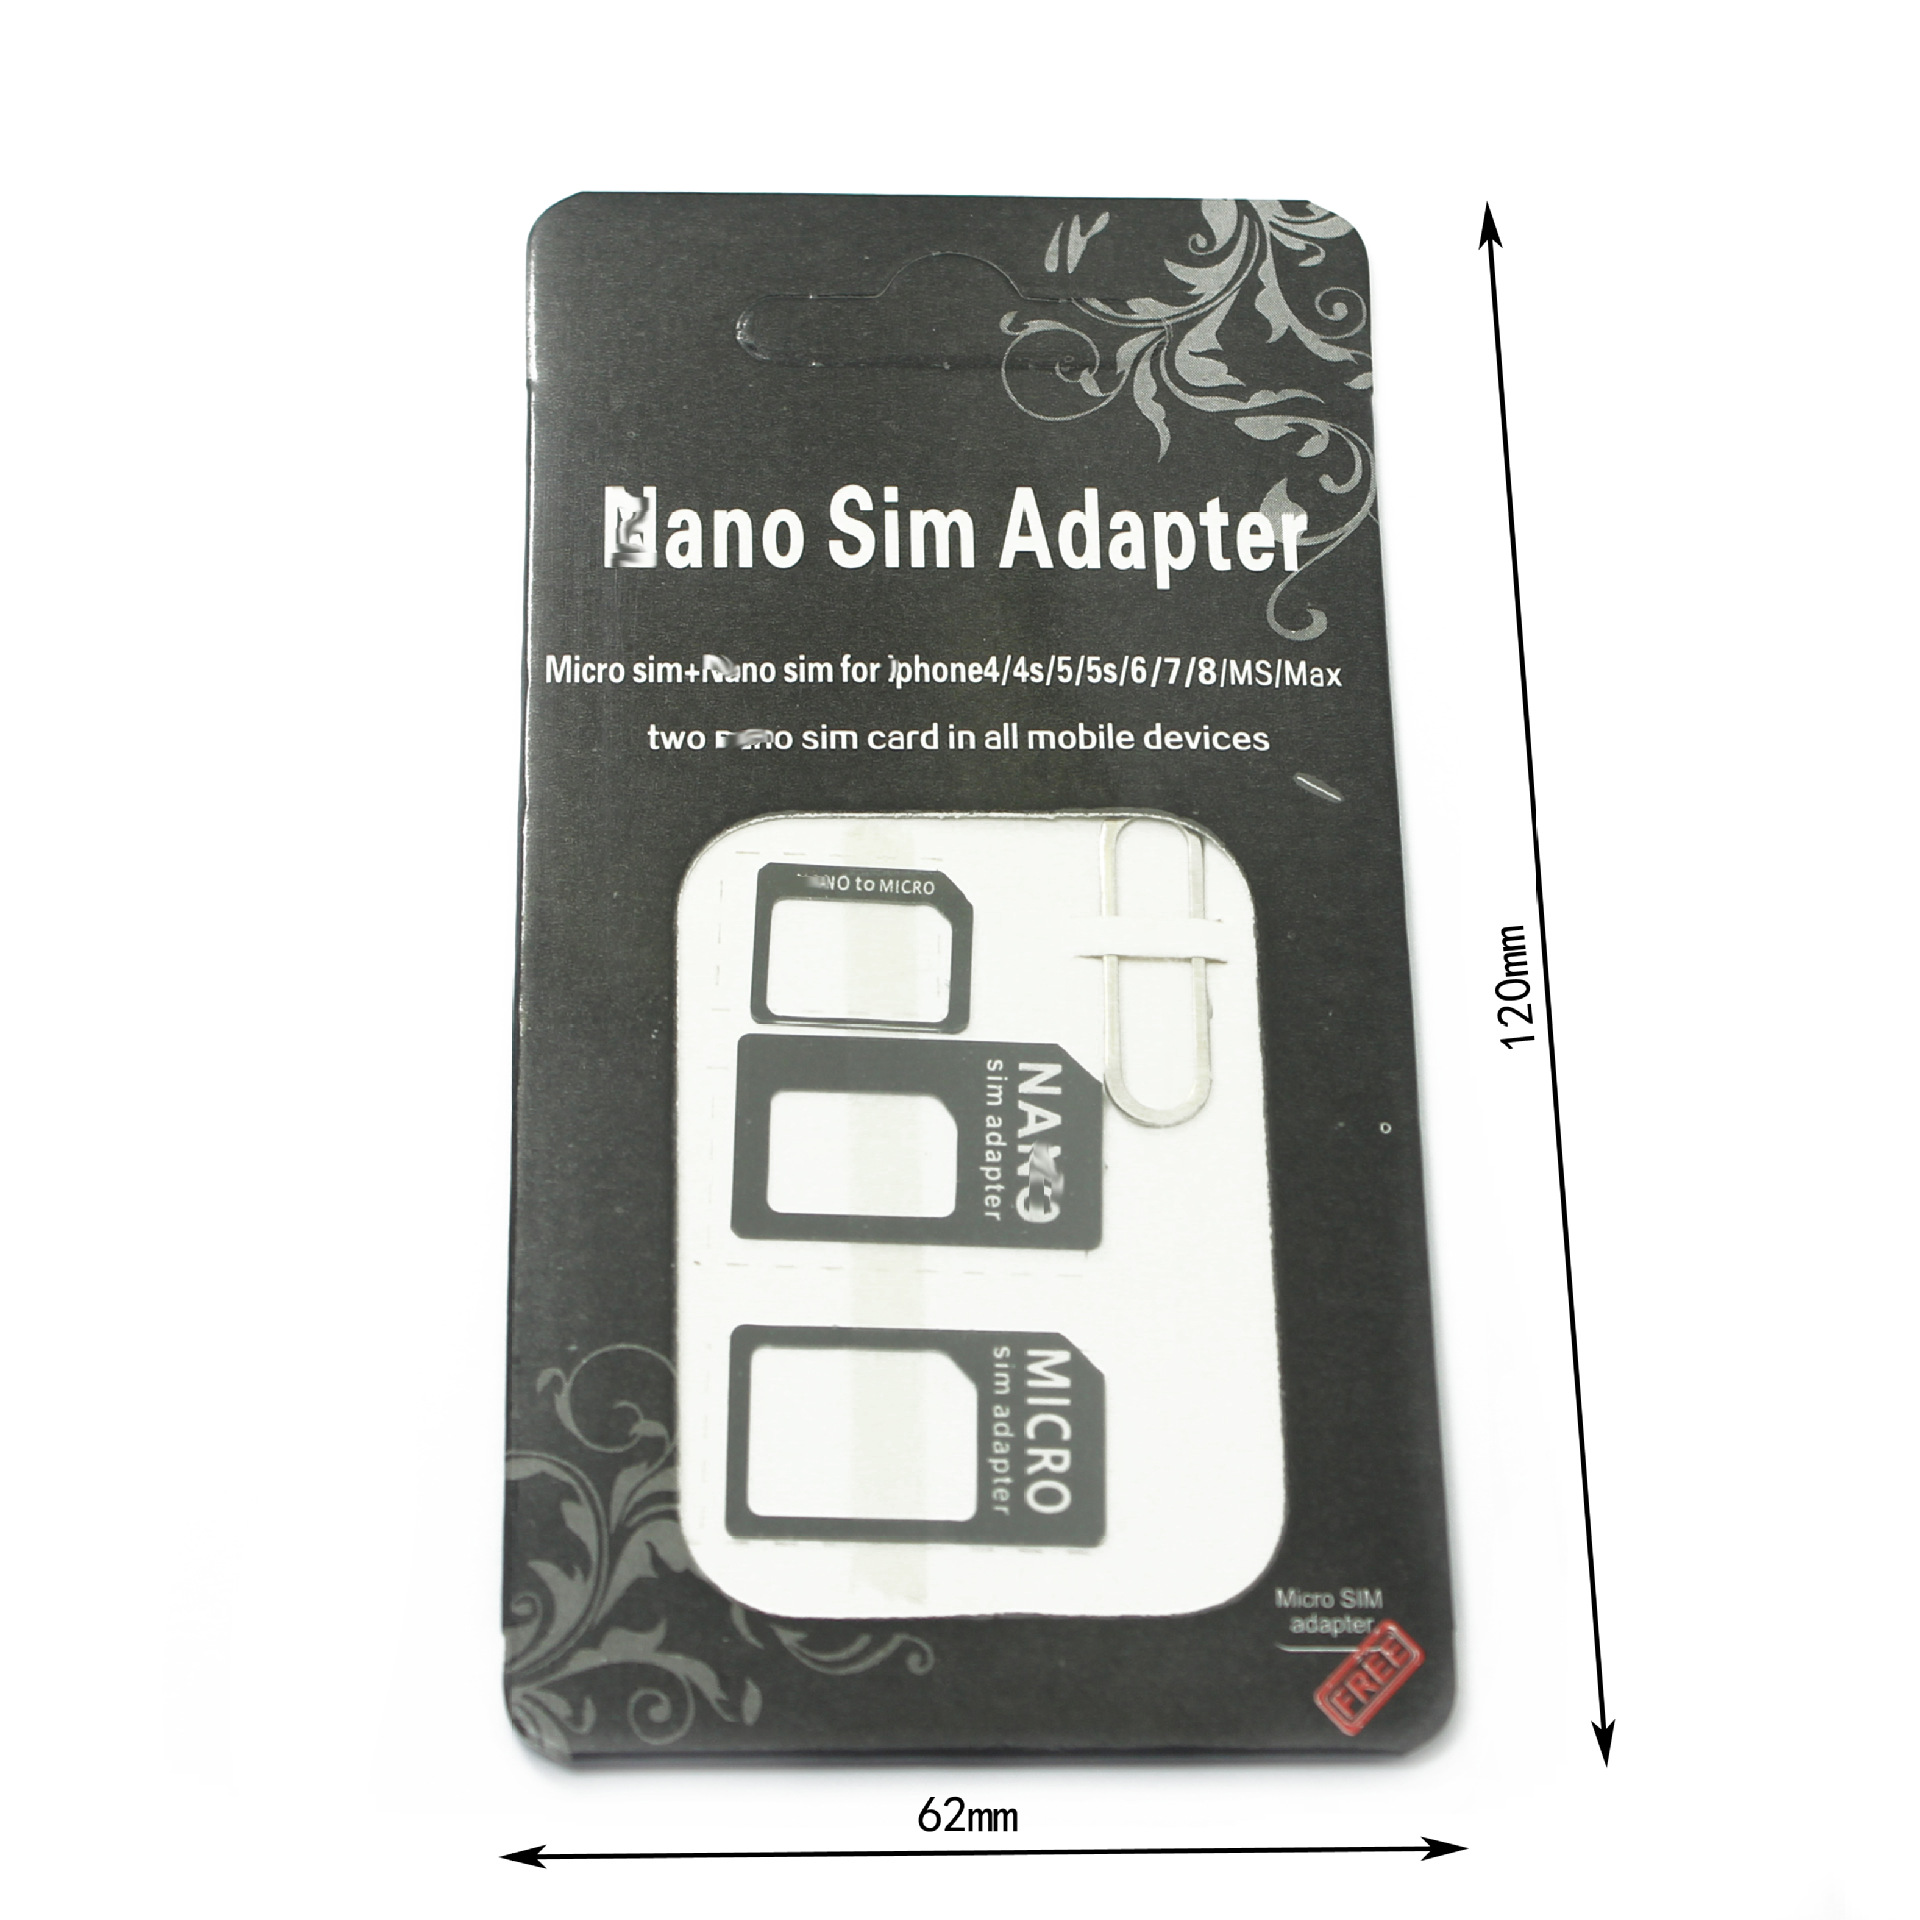 4 In 1 Nano Micro SIM Card Accessories Adapter Eject Pin For Iphone 5 For Iphone 4 4S 6 Samsung S4 S3 Retail Box